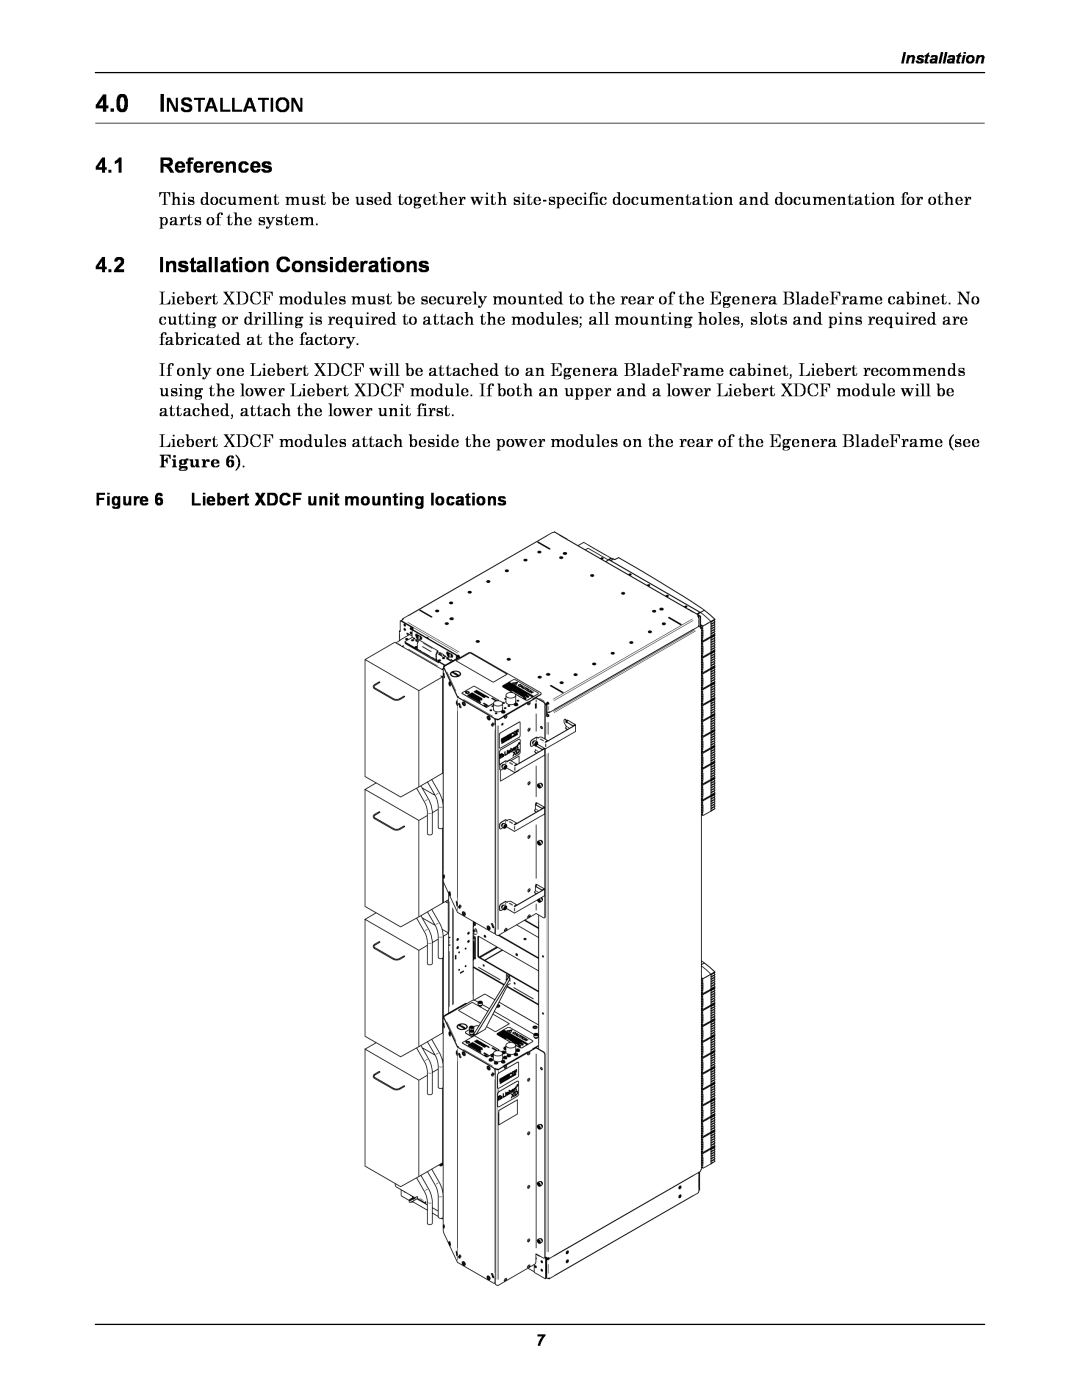 Emerson user manual References, Installation Considerations, Liebert XDCF unit mounting locations 